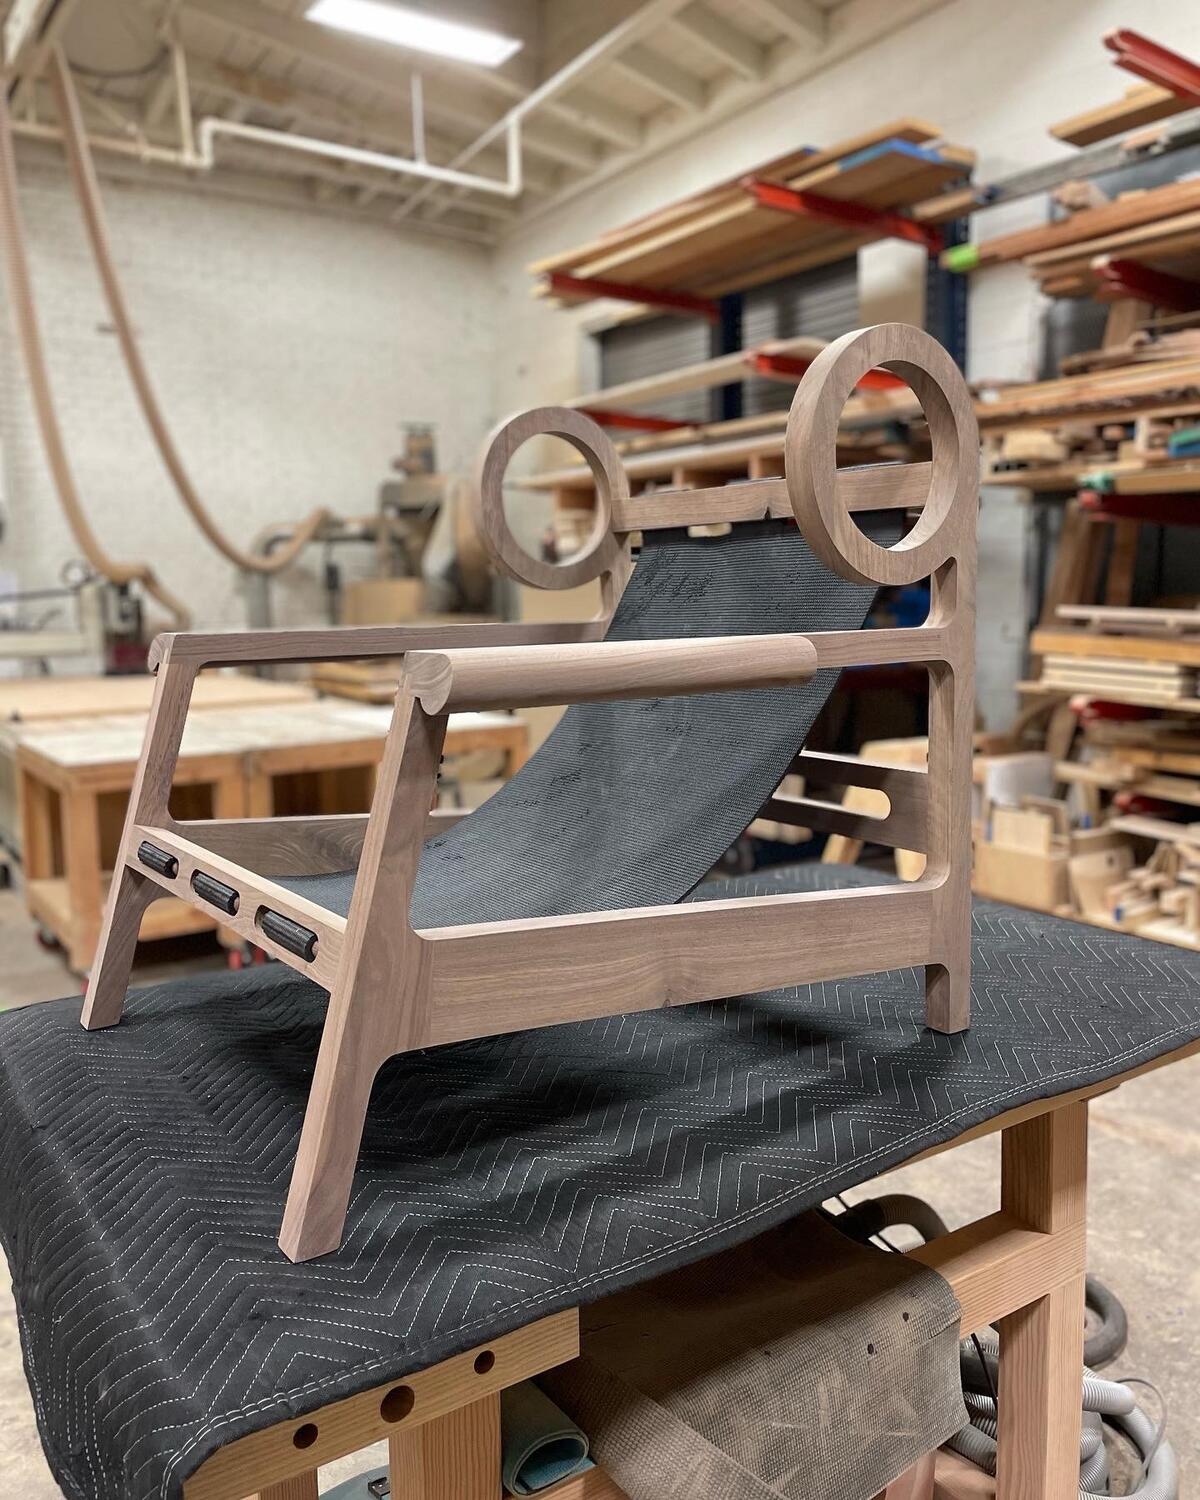 This self-taught furniture-maker crafts heirloom-quality pieces with modern appeal